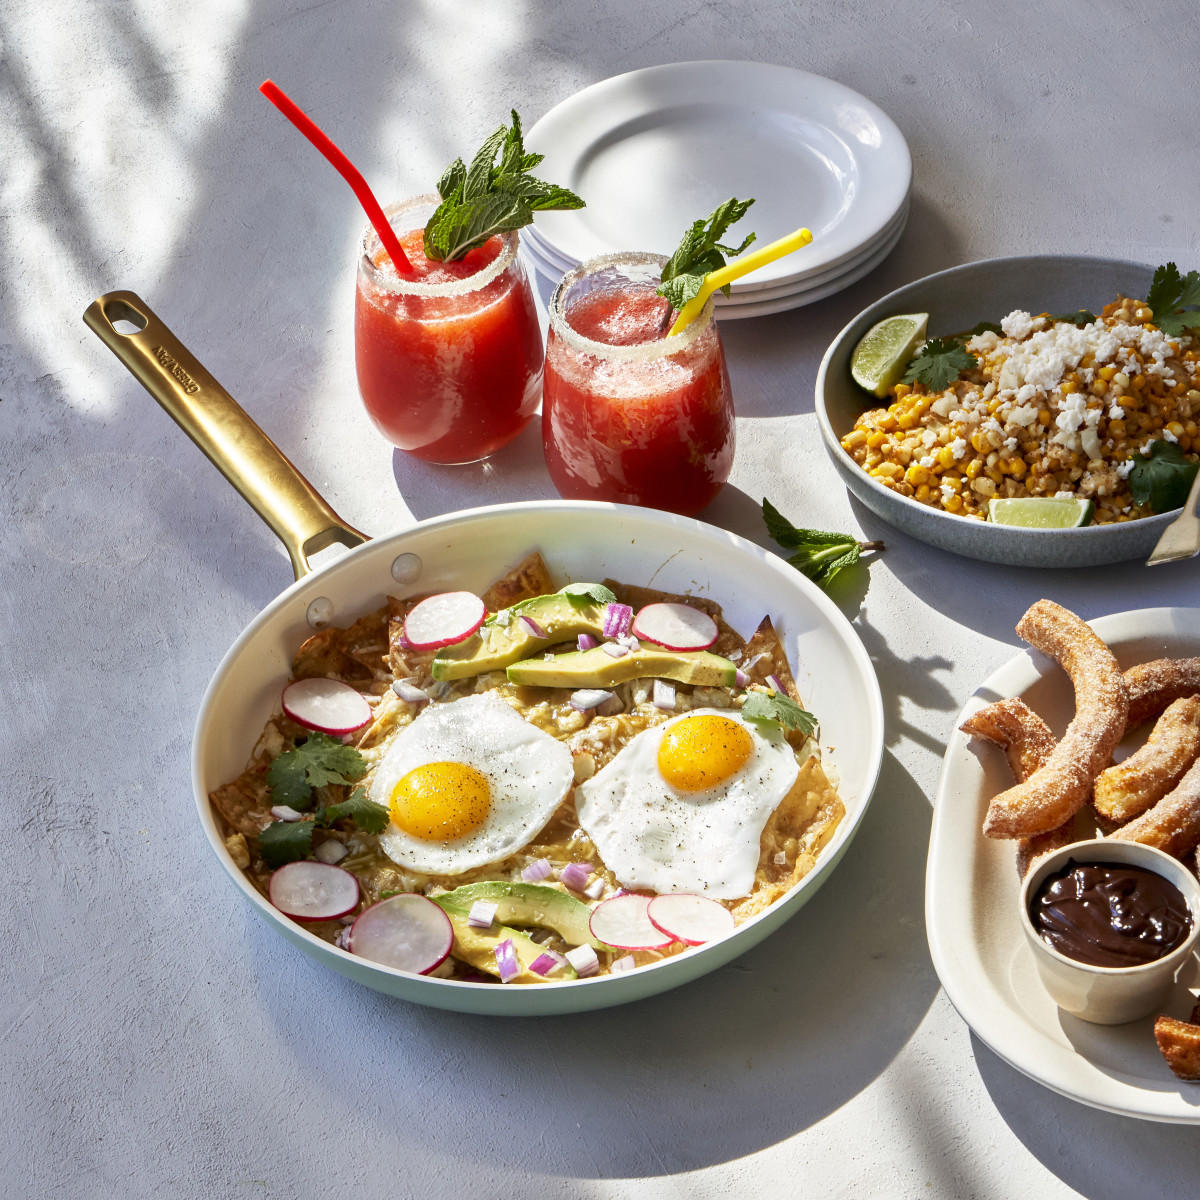 A brunch spread in the sunshine, with watermelon mint drinks, churros, and chilaquiles.